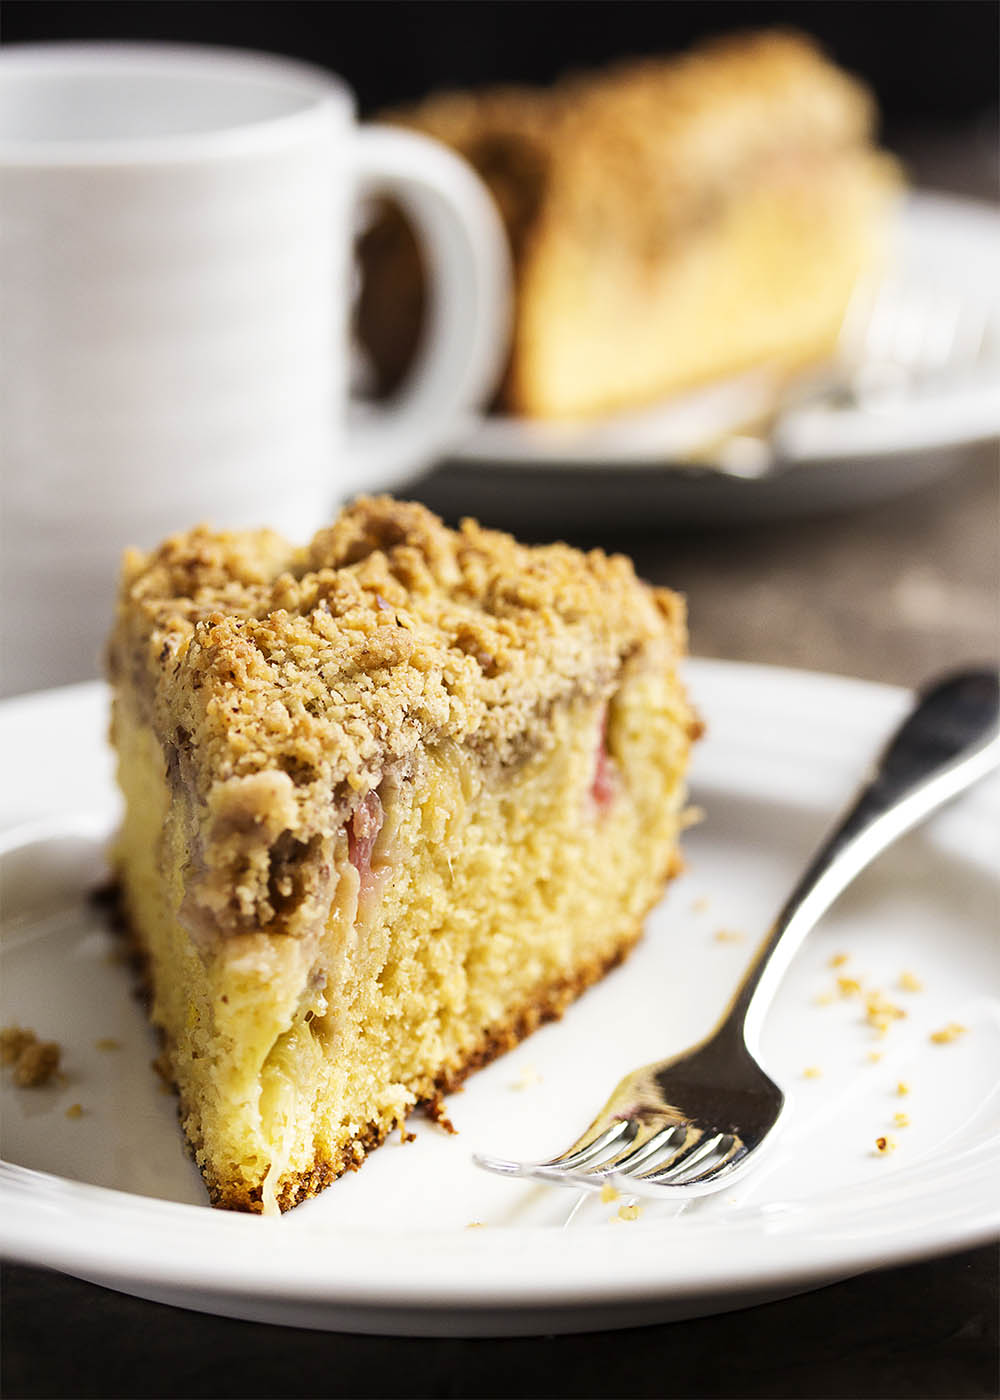 A slice of rhubarb breakfast cake on a plate with a fork.